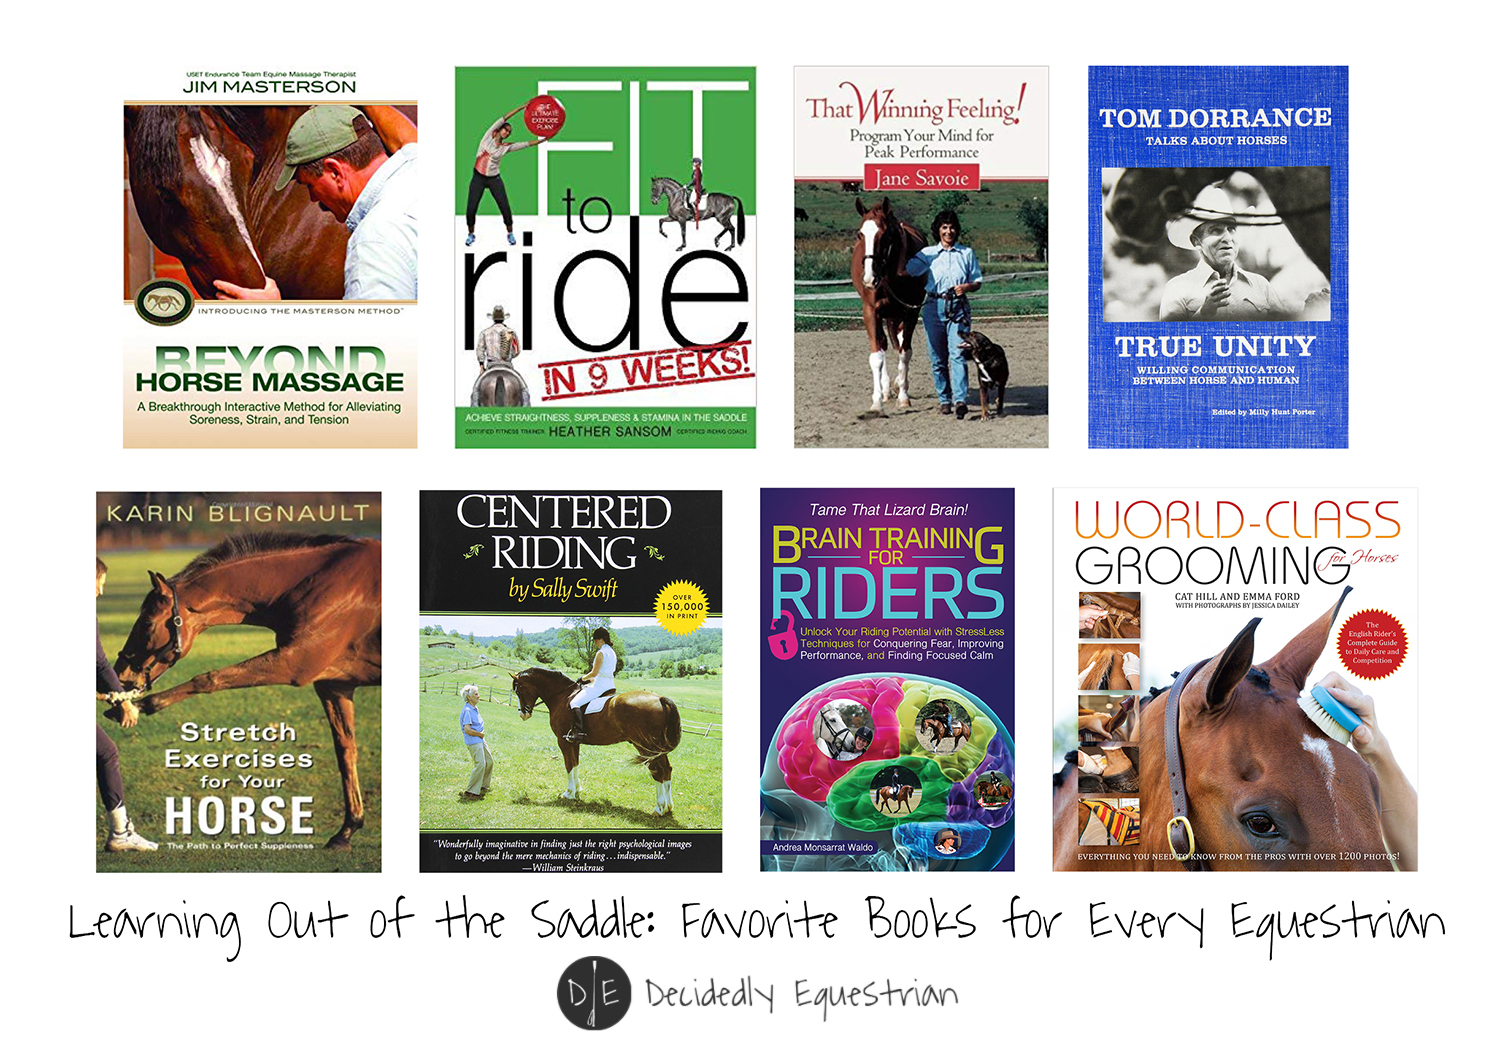 Favorite Books for Every Equestrian